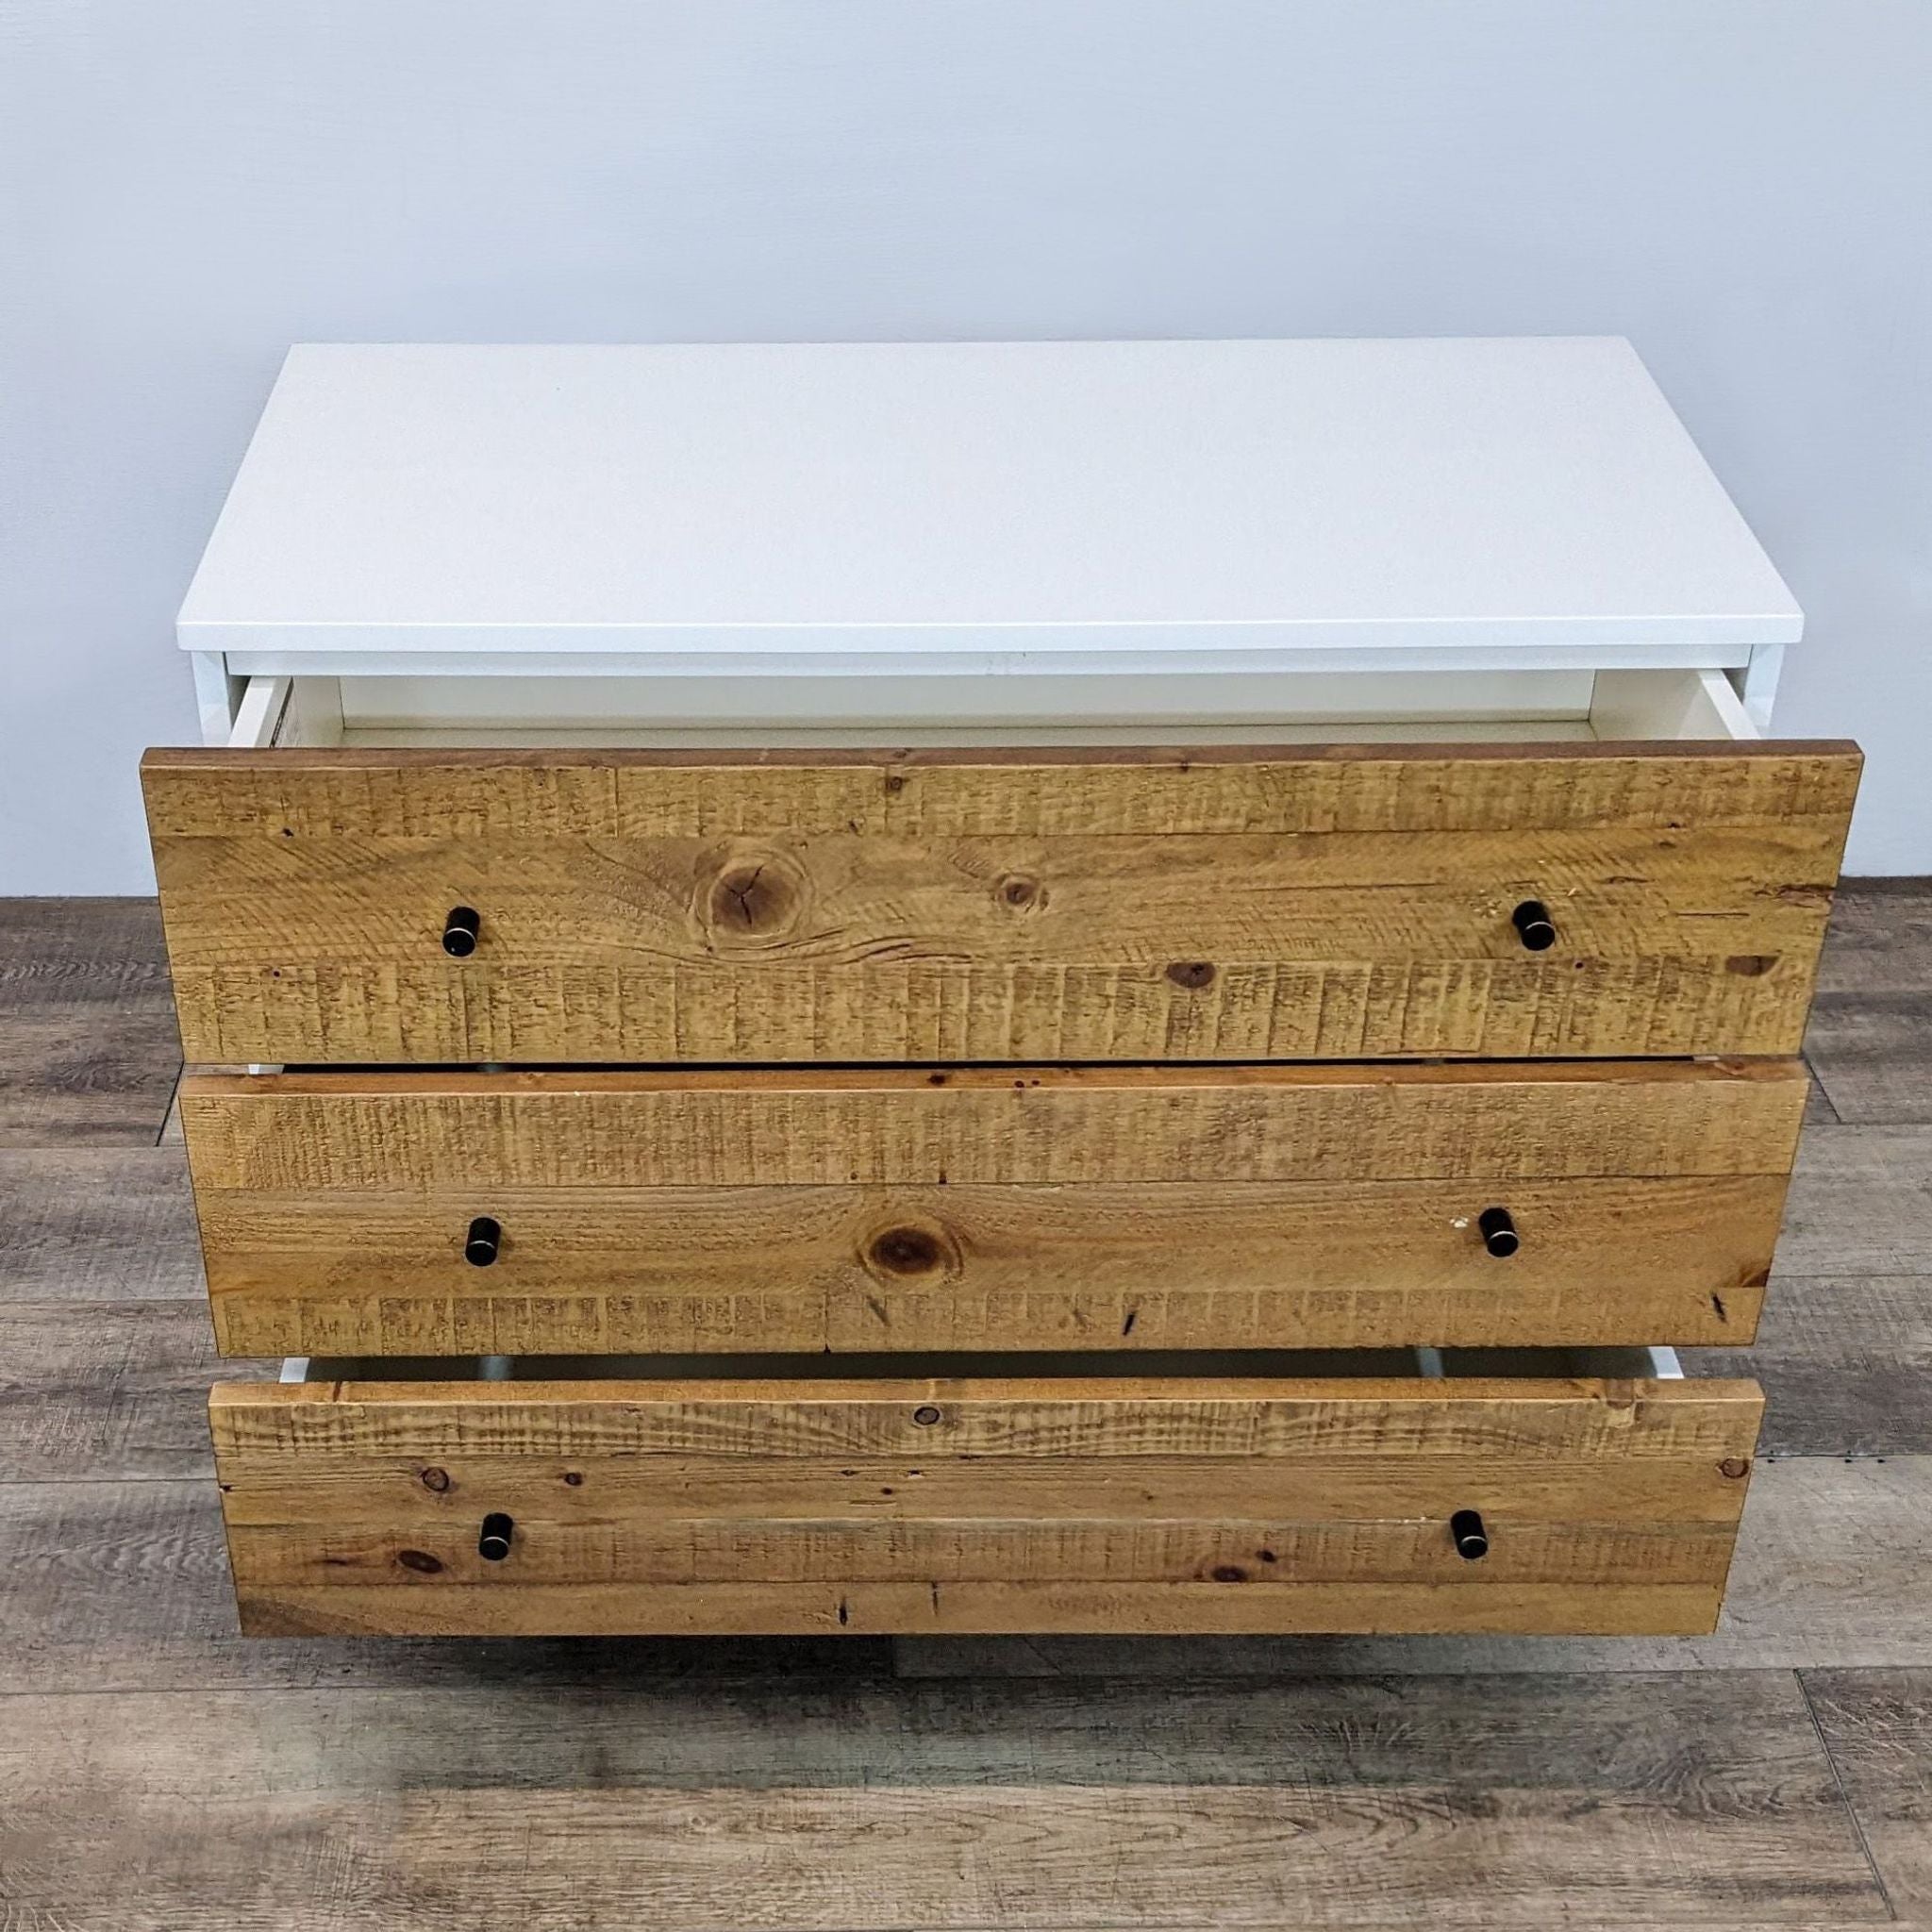 2. Opened reclaimed wood-style drawers of a West Elm dresser with white casing on a wood floor.